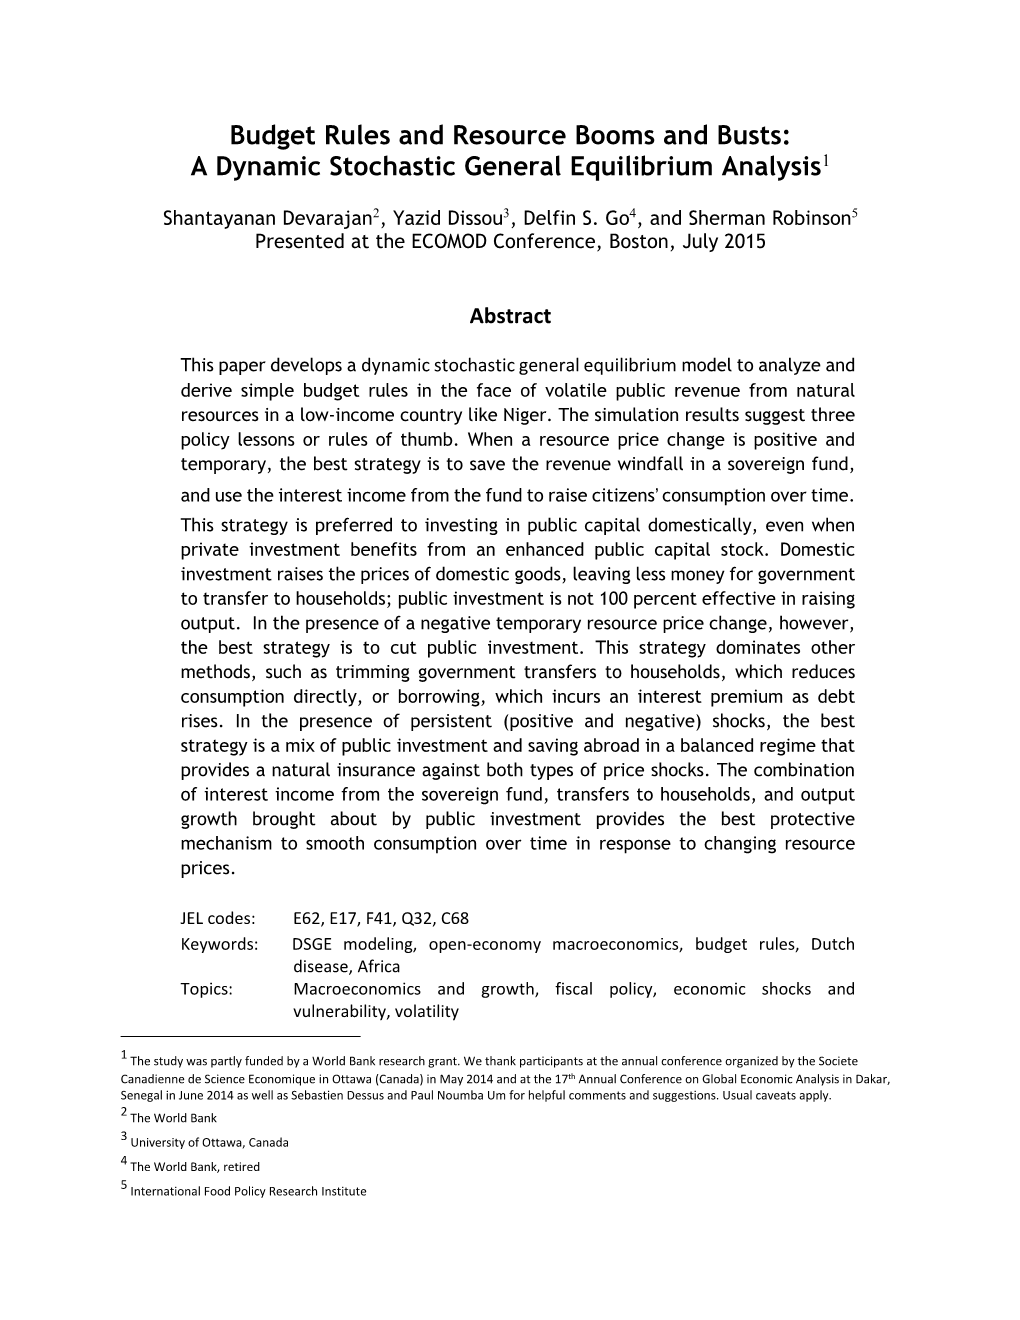 A Dynamic Stochastic General Equilibrium Analysis1